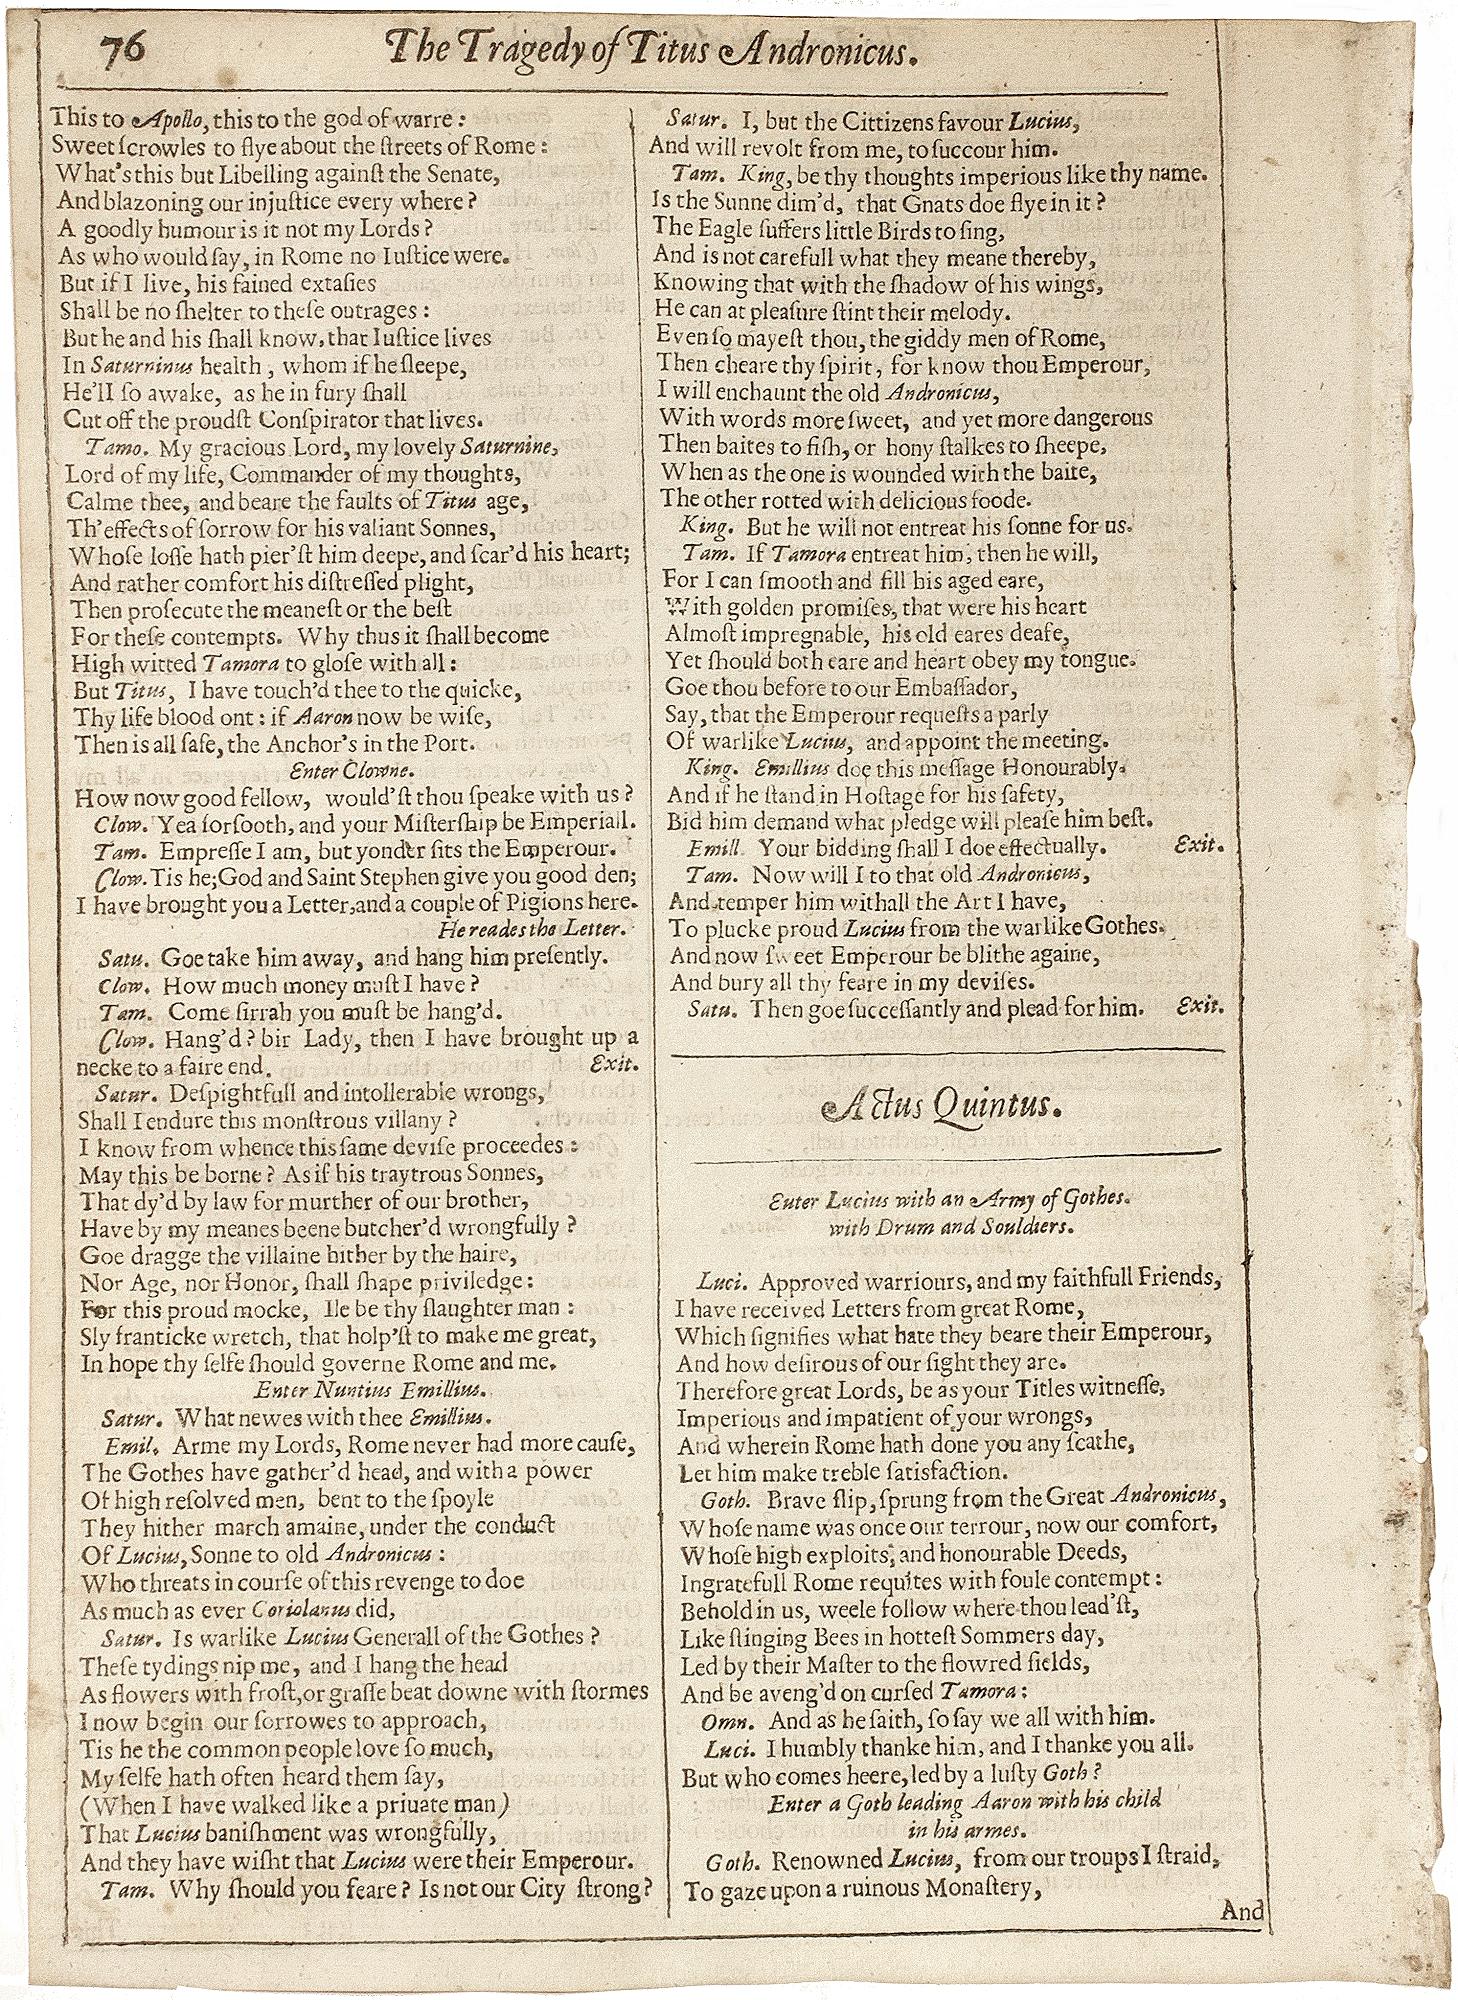 Paper Works of William Shakespeare. 1632 - (Tragedy of Titus Andronicus) - page 75-76 For Sale